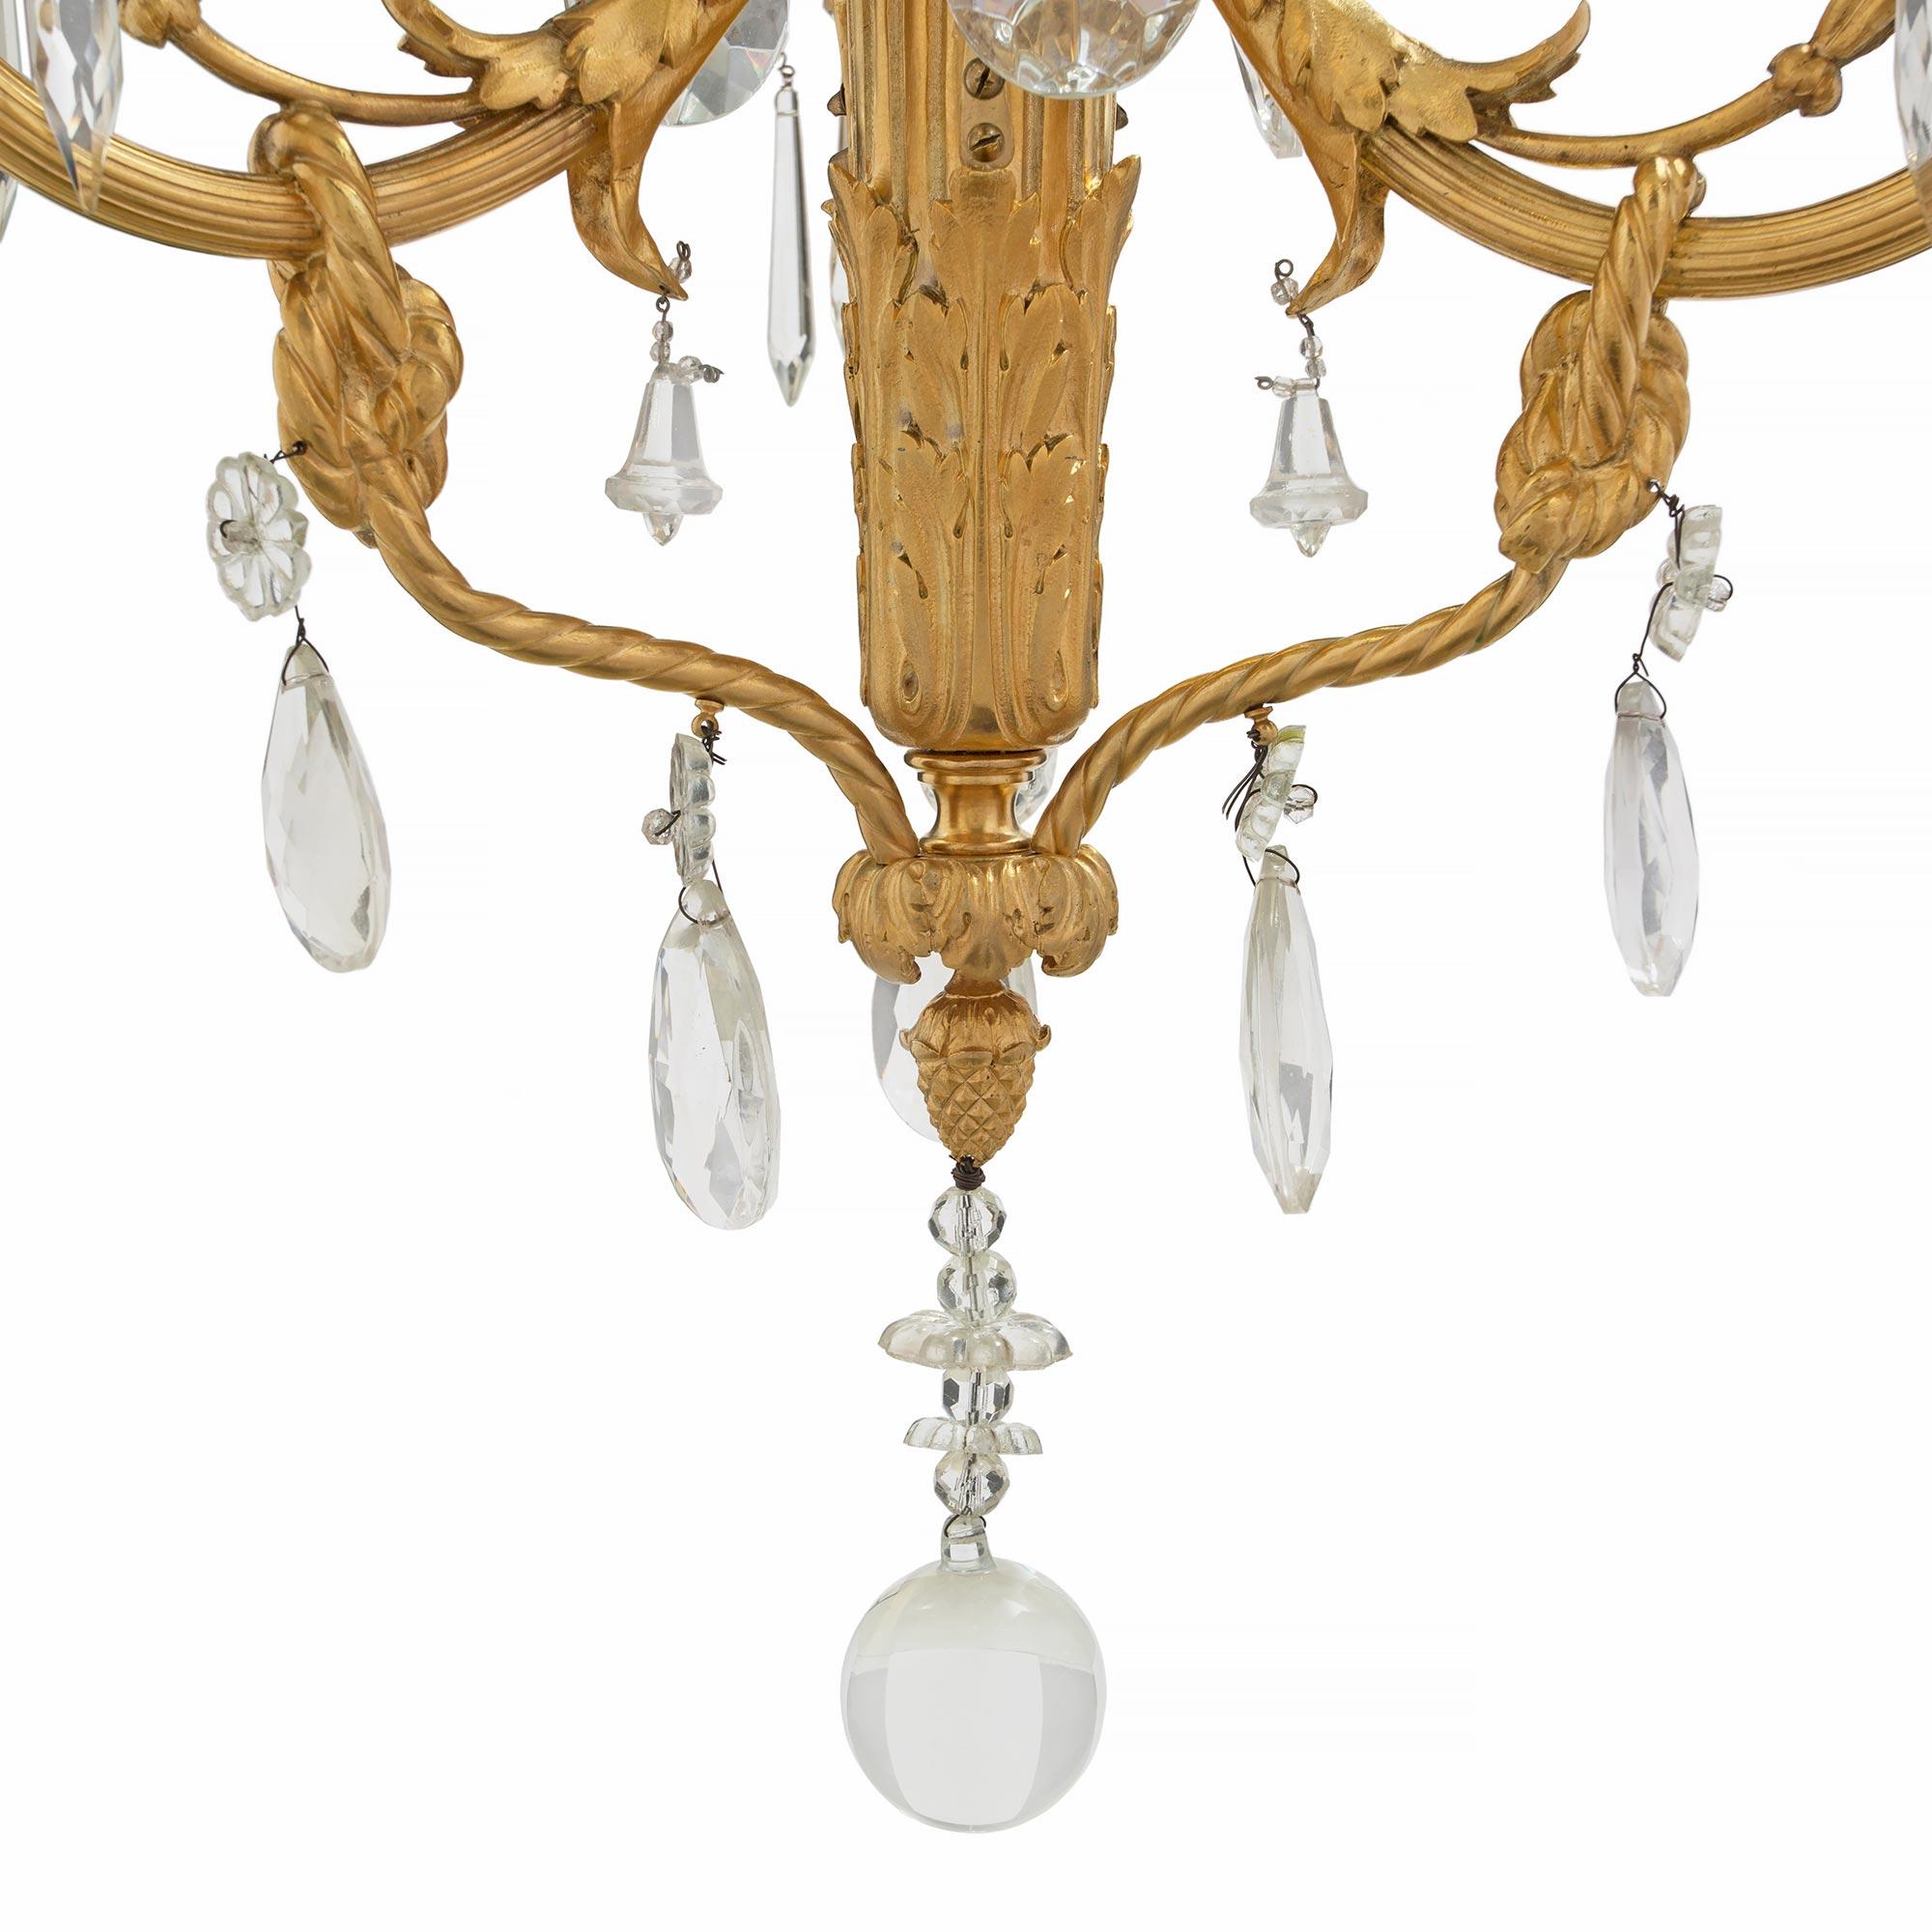 French 19th Century Louis XVI Style Baccarat Crystal and Ormolu Chandelier For Sale 3